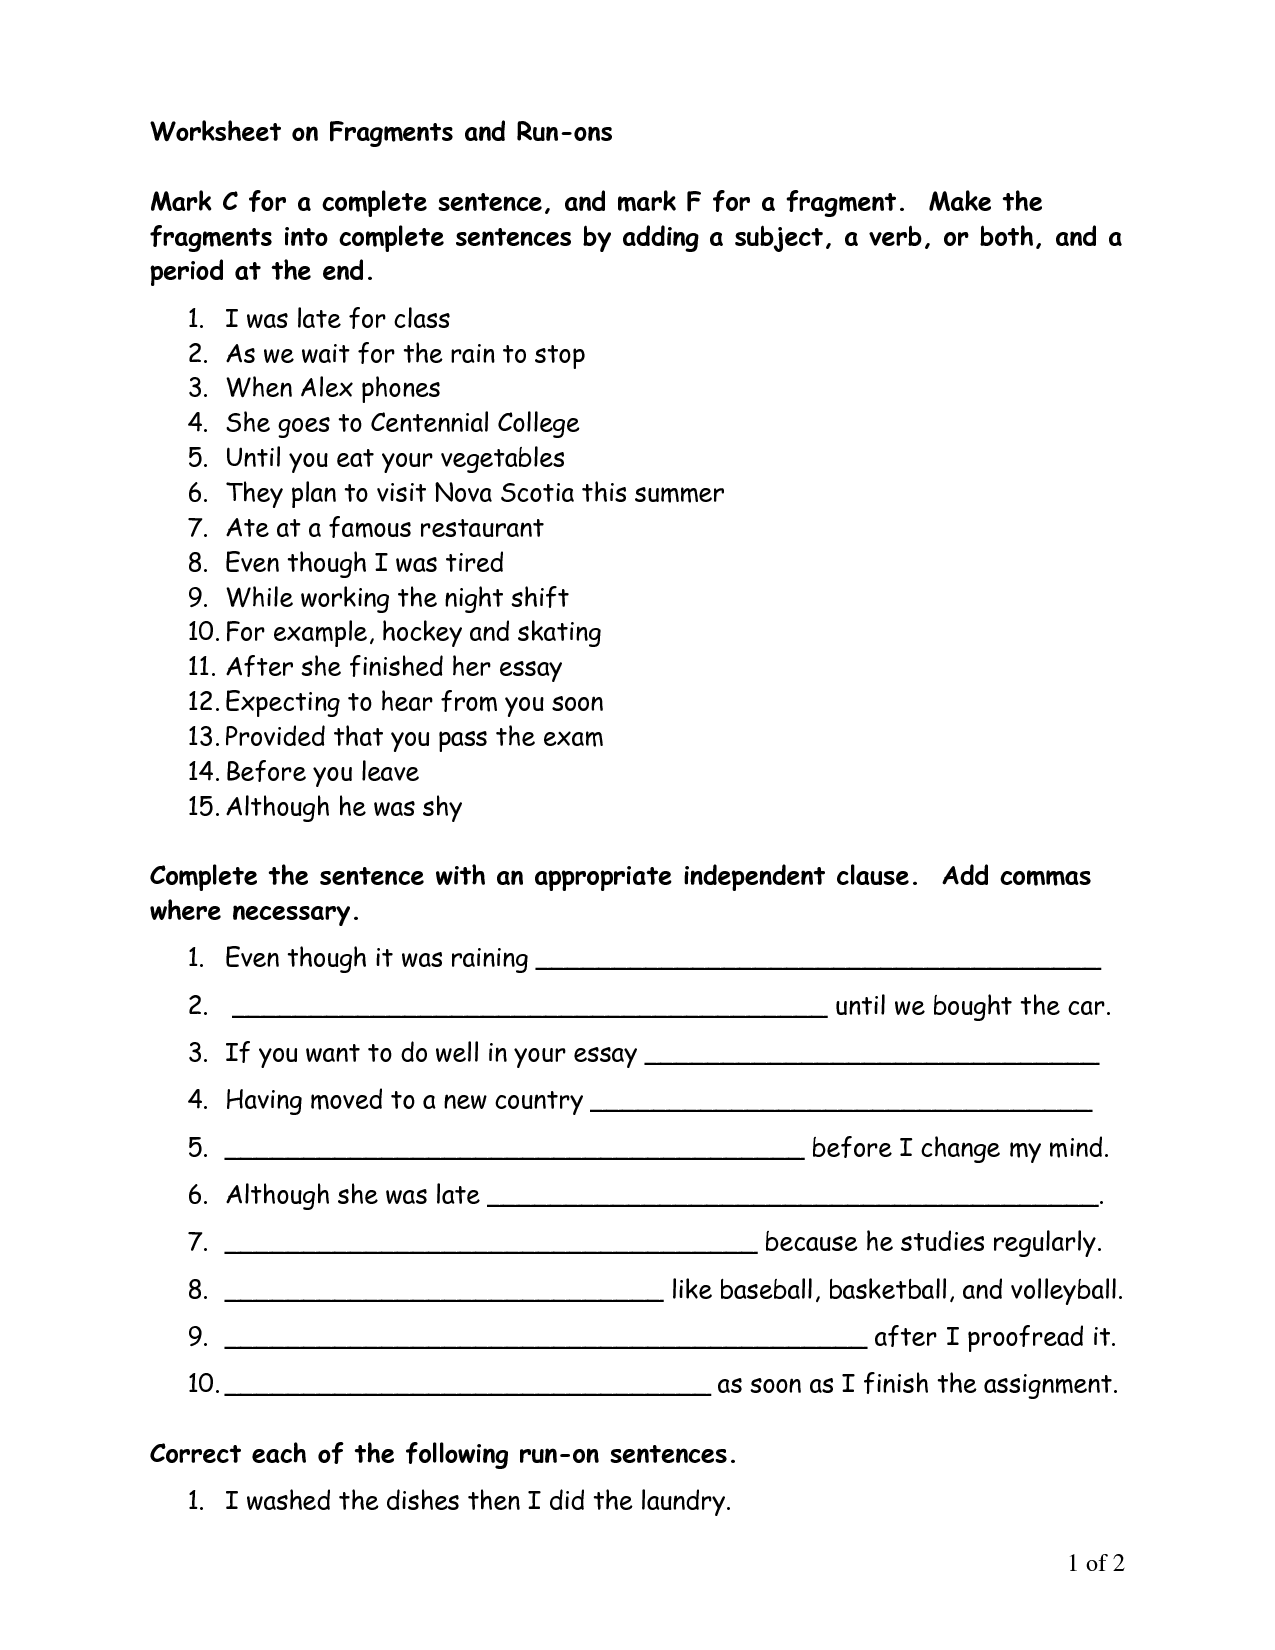 Identifying Sentence Fragments Practice A Worksheet 1 Answers